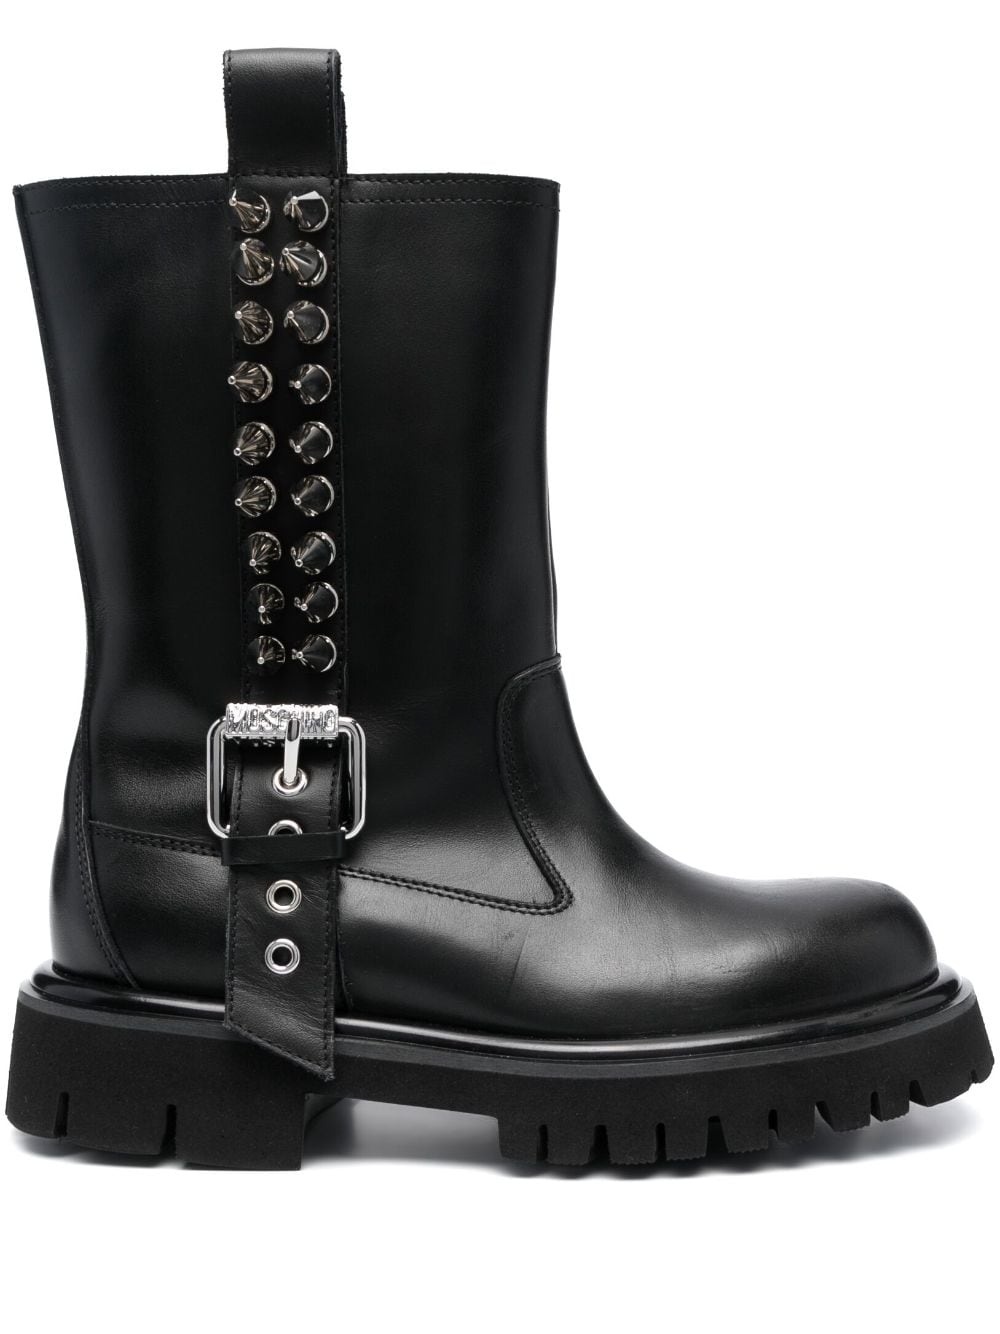 spike-embellished leather boots - 1